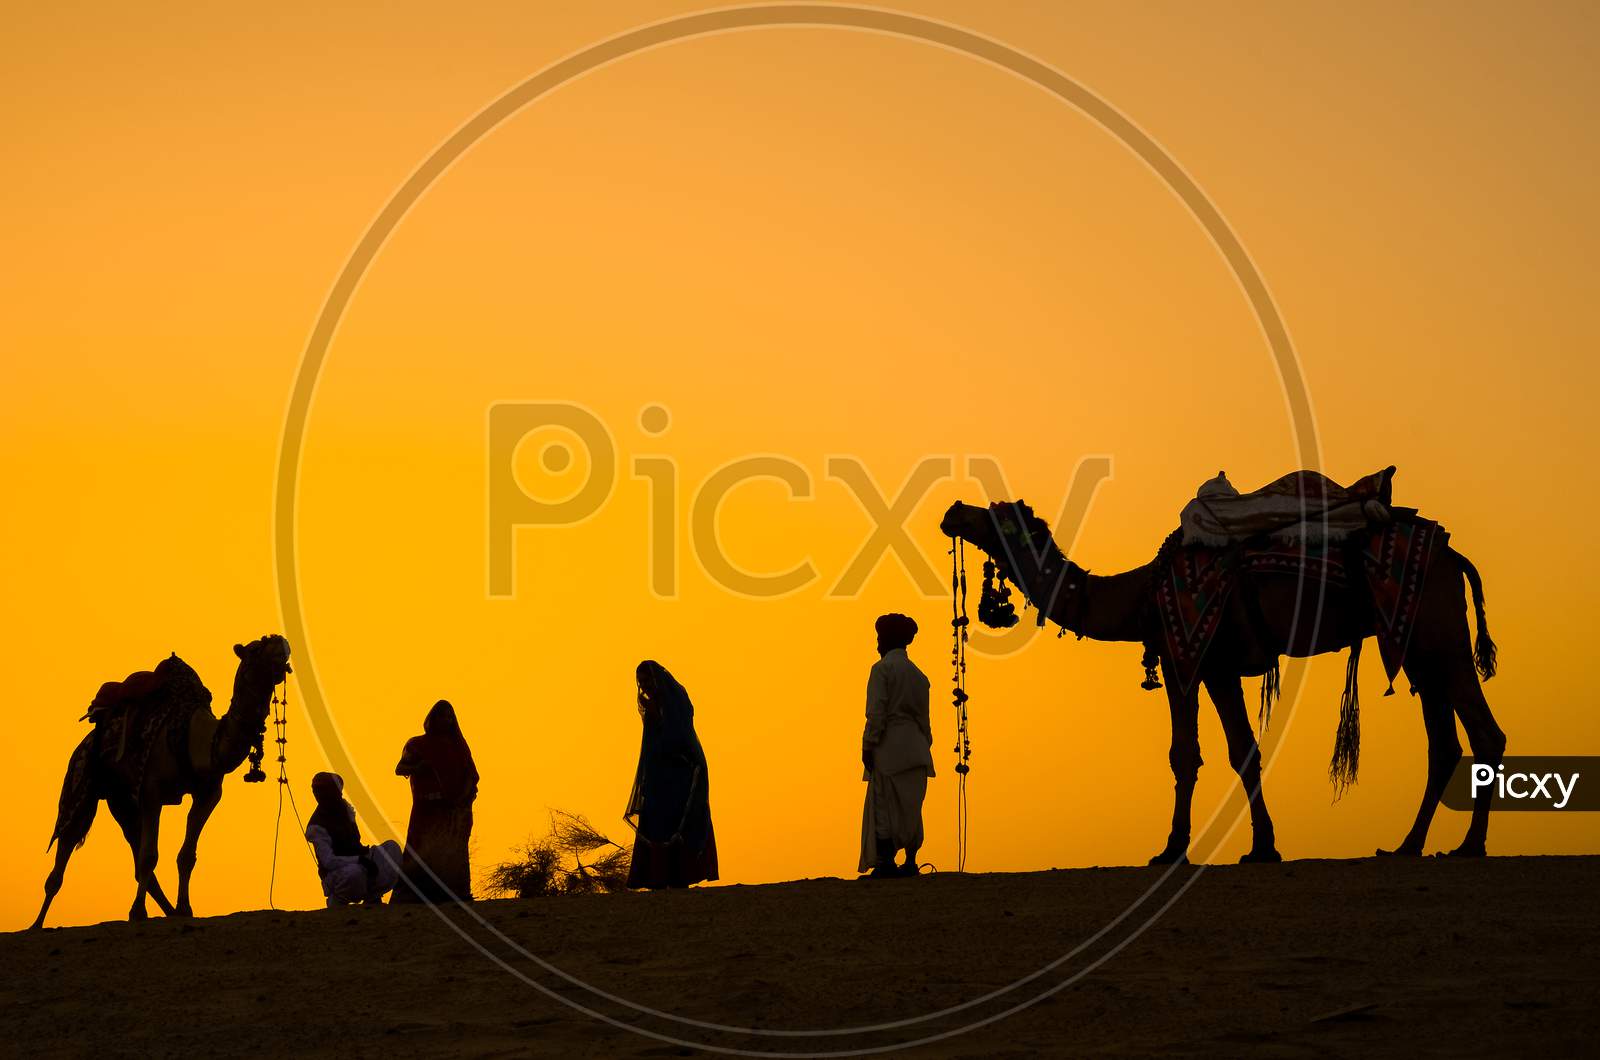 Jaisalmer, Rajasthan, India - April 18Th, 2018: Indian Cameleers (Camel Drivers) With Camels Silhouettes In Dunes Of Thar Desert On Sunset.